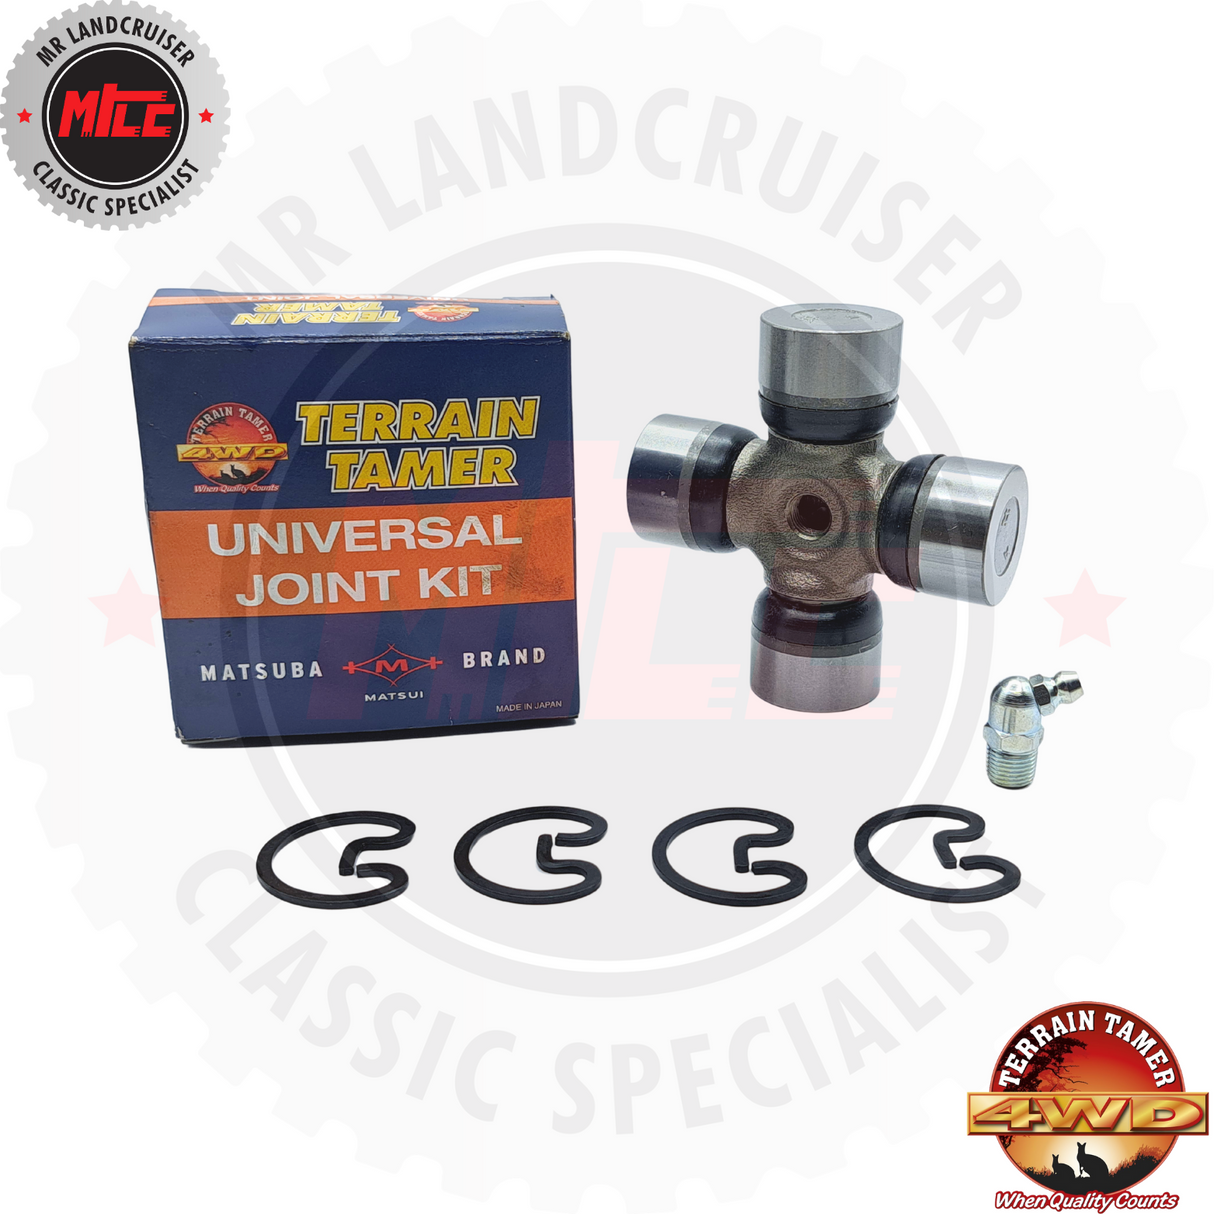 Universal Joint Kit Front & Rear suitable for 40 & 45 series Toyota Landcruiser with packaging and seals